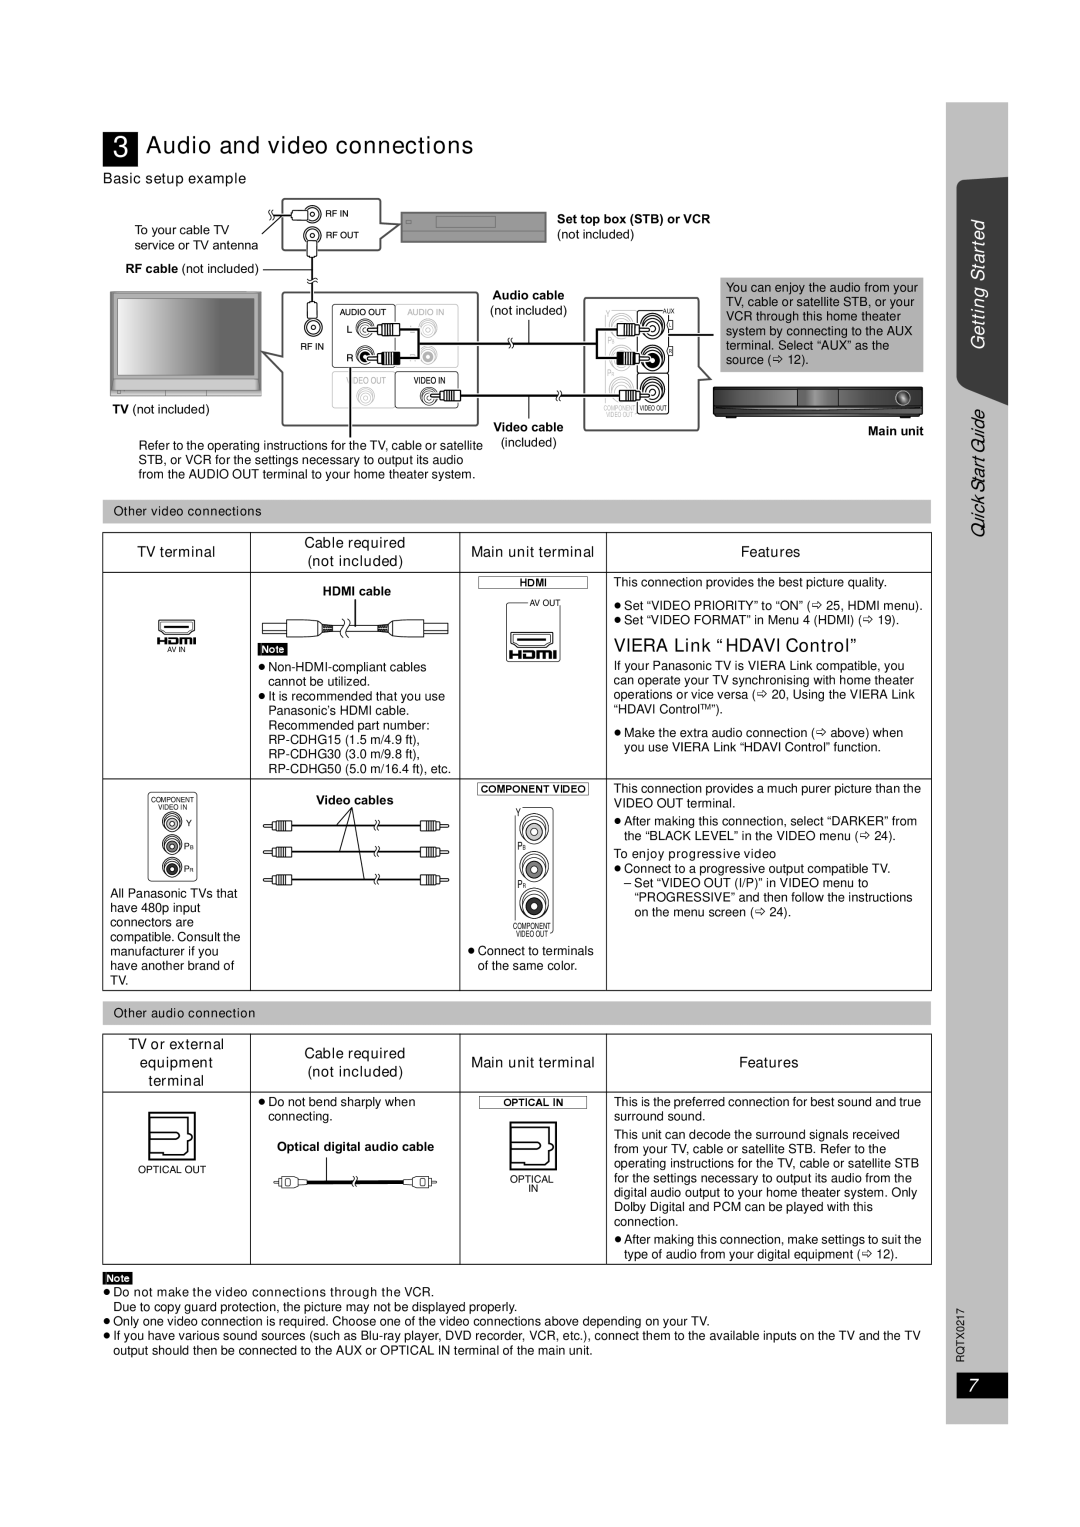 Panasonic SC-PT464 manual 3Audio and video connections, VIERA Link “HDAVI Control”, Getting Started, Start Guide, Quick 